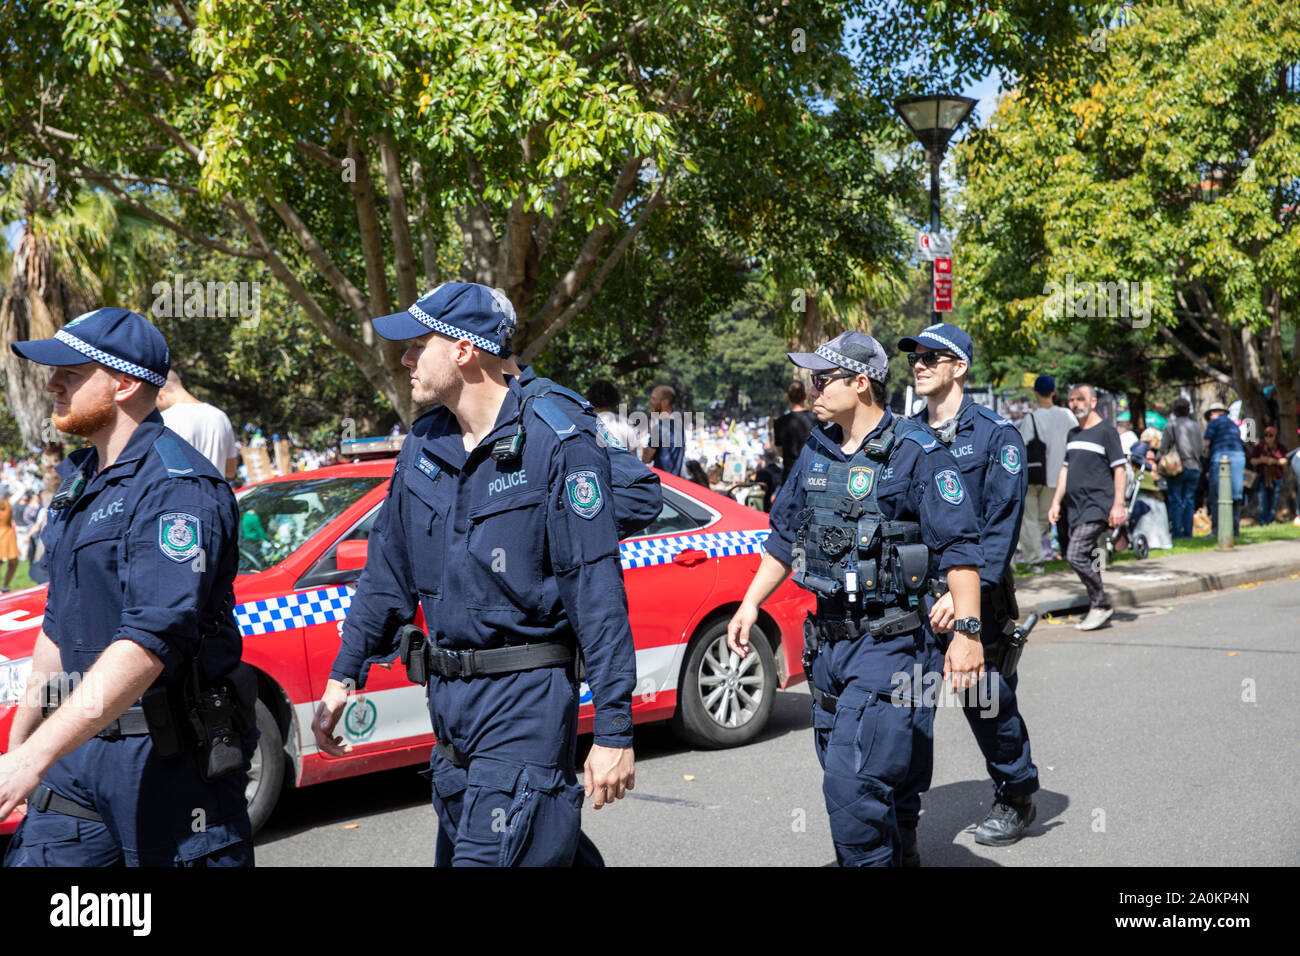 Sydney Australia, New South Wales public order and riot squad police officers maintain order during the climate change strike protest in Sydney Stock Photo